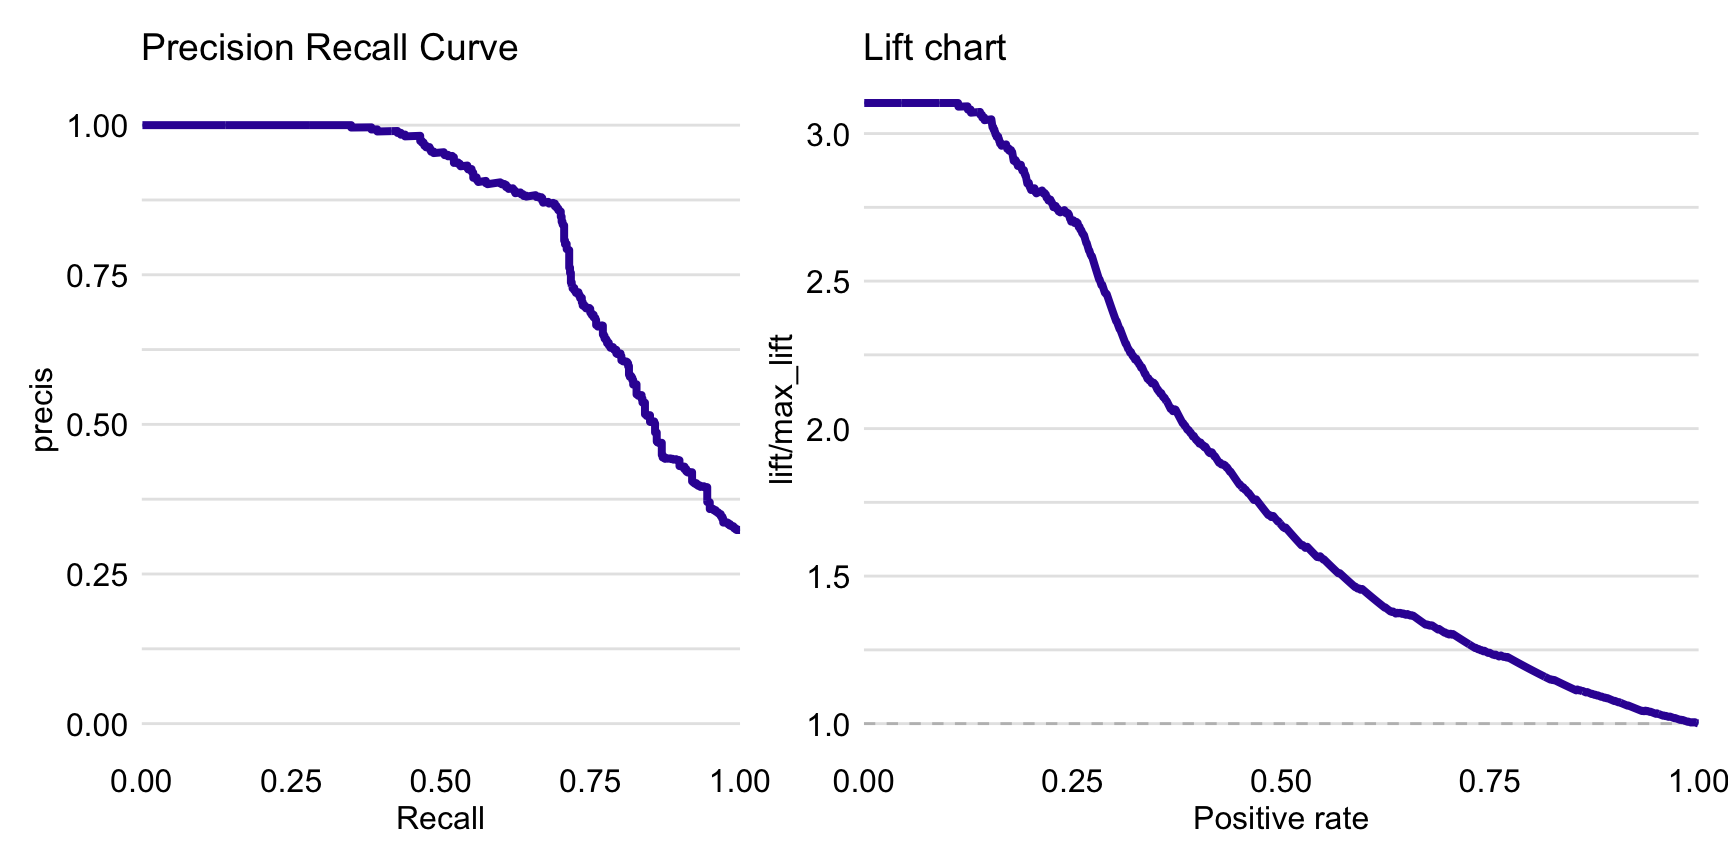 Precision-recall curve (left panel) and lift chart (right panel) for the random forest model for the Titanic dataset.